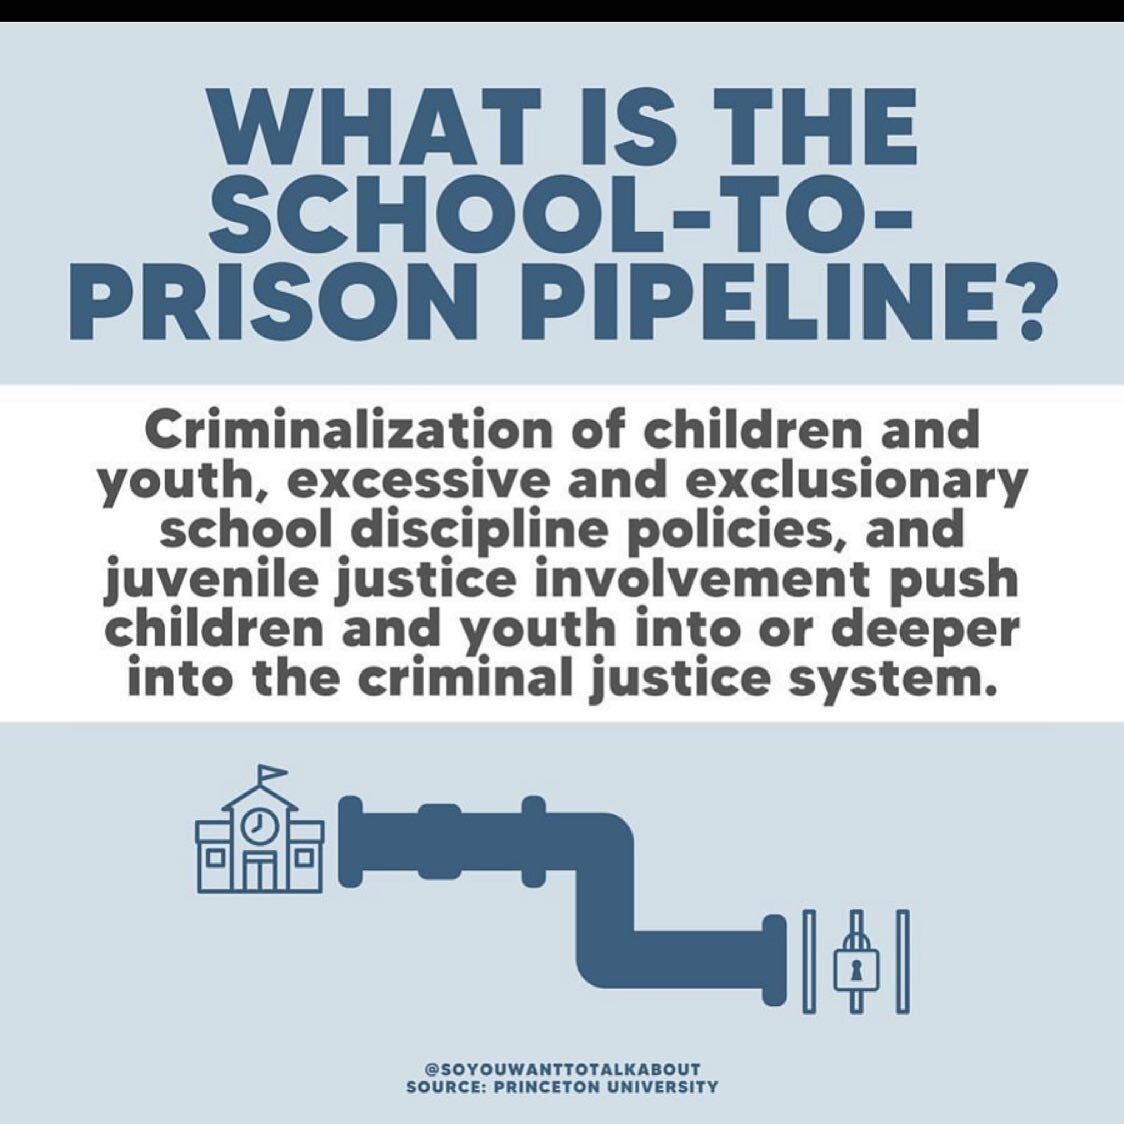 The Seeds mission is to interrupt the school-to-prison pipeline via advocacy, education and direct services. The criminalization of youth is a vast issue with a large number of entry points with school only being one of them. As an organization we th